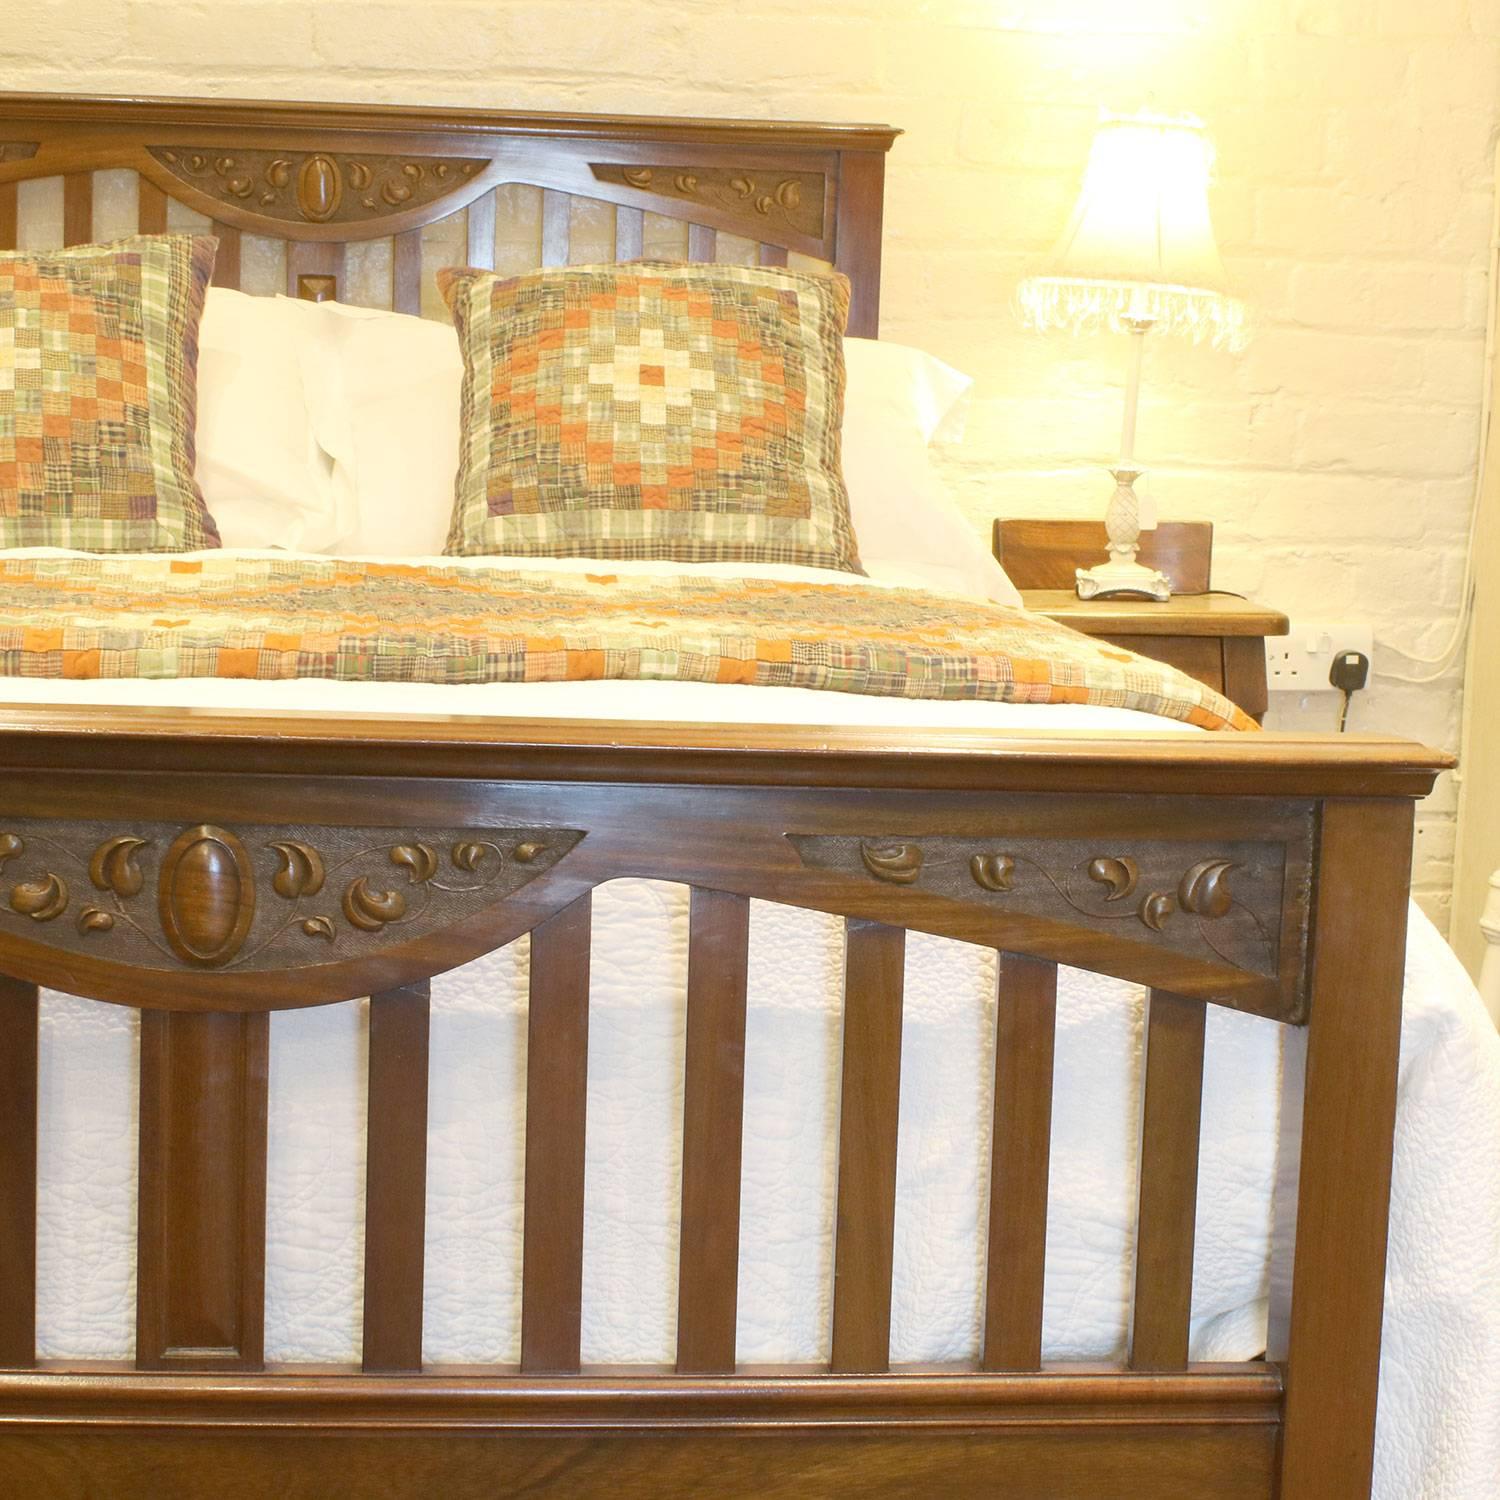 A low mahogany panelled bed.

This bed accepts a double size base and mattress (54 inches, 4ft 6in or 135 cm).

The price is for the bed frame alone - the base, mattress, bedding and linen are extra and can be supplied.